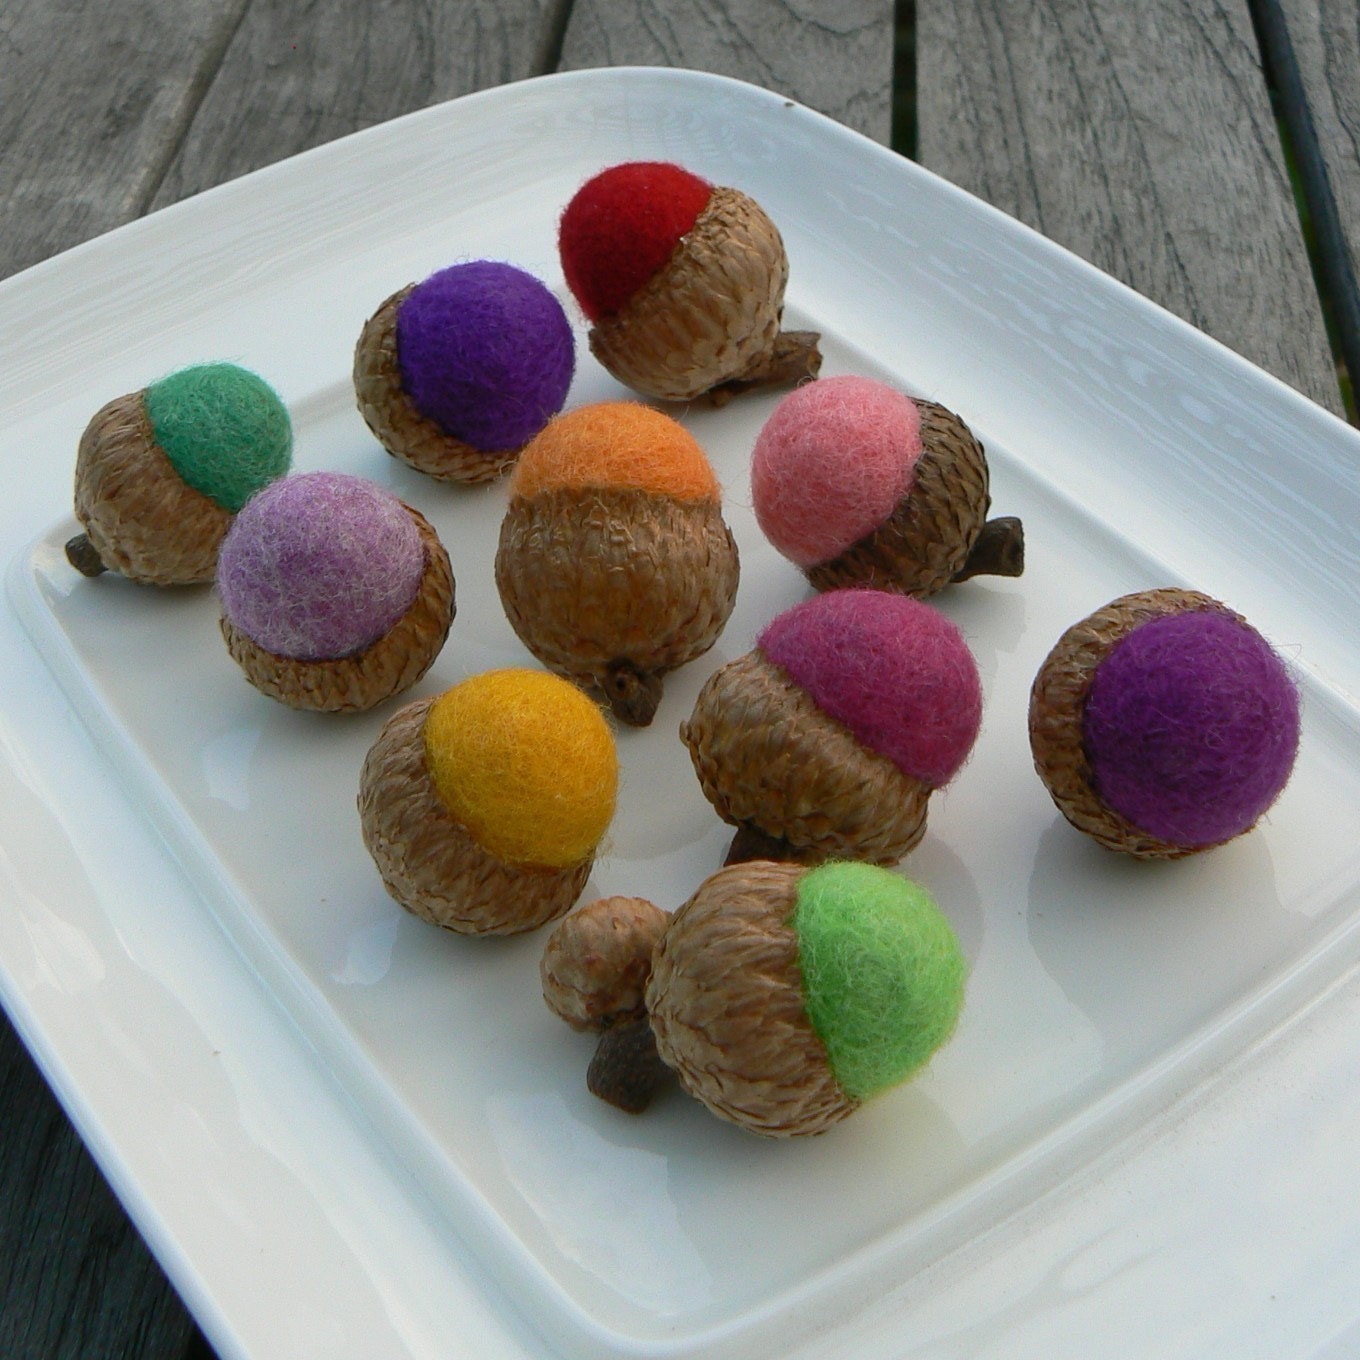 Candy - 10 Felted Acorns in Candy Colors.